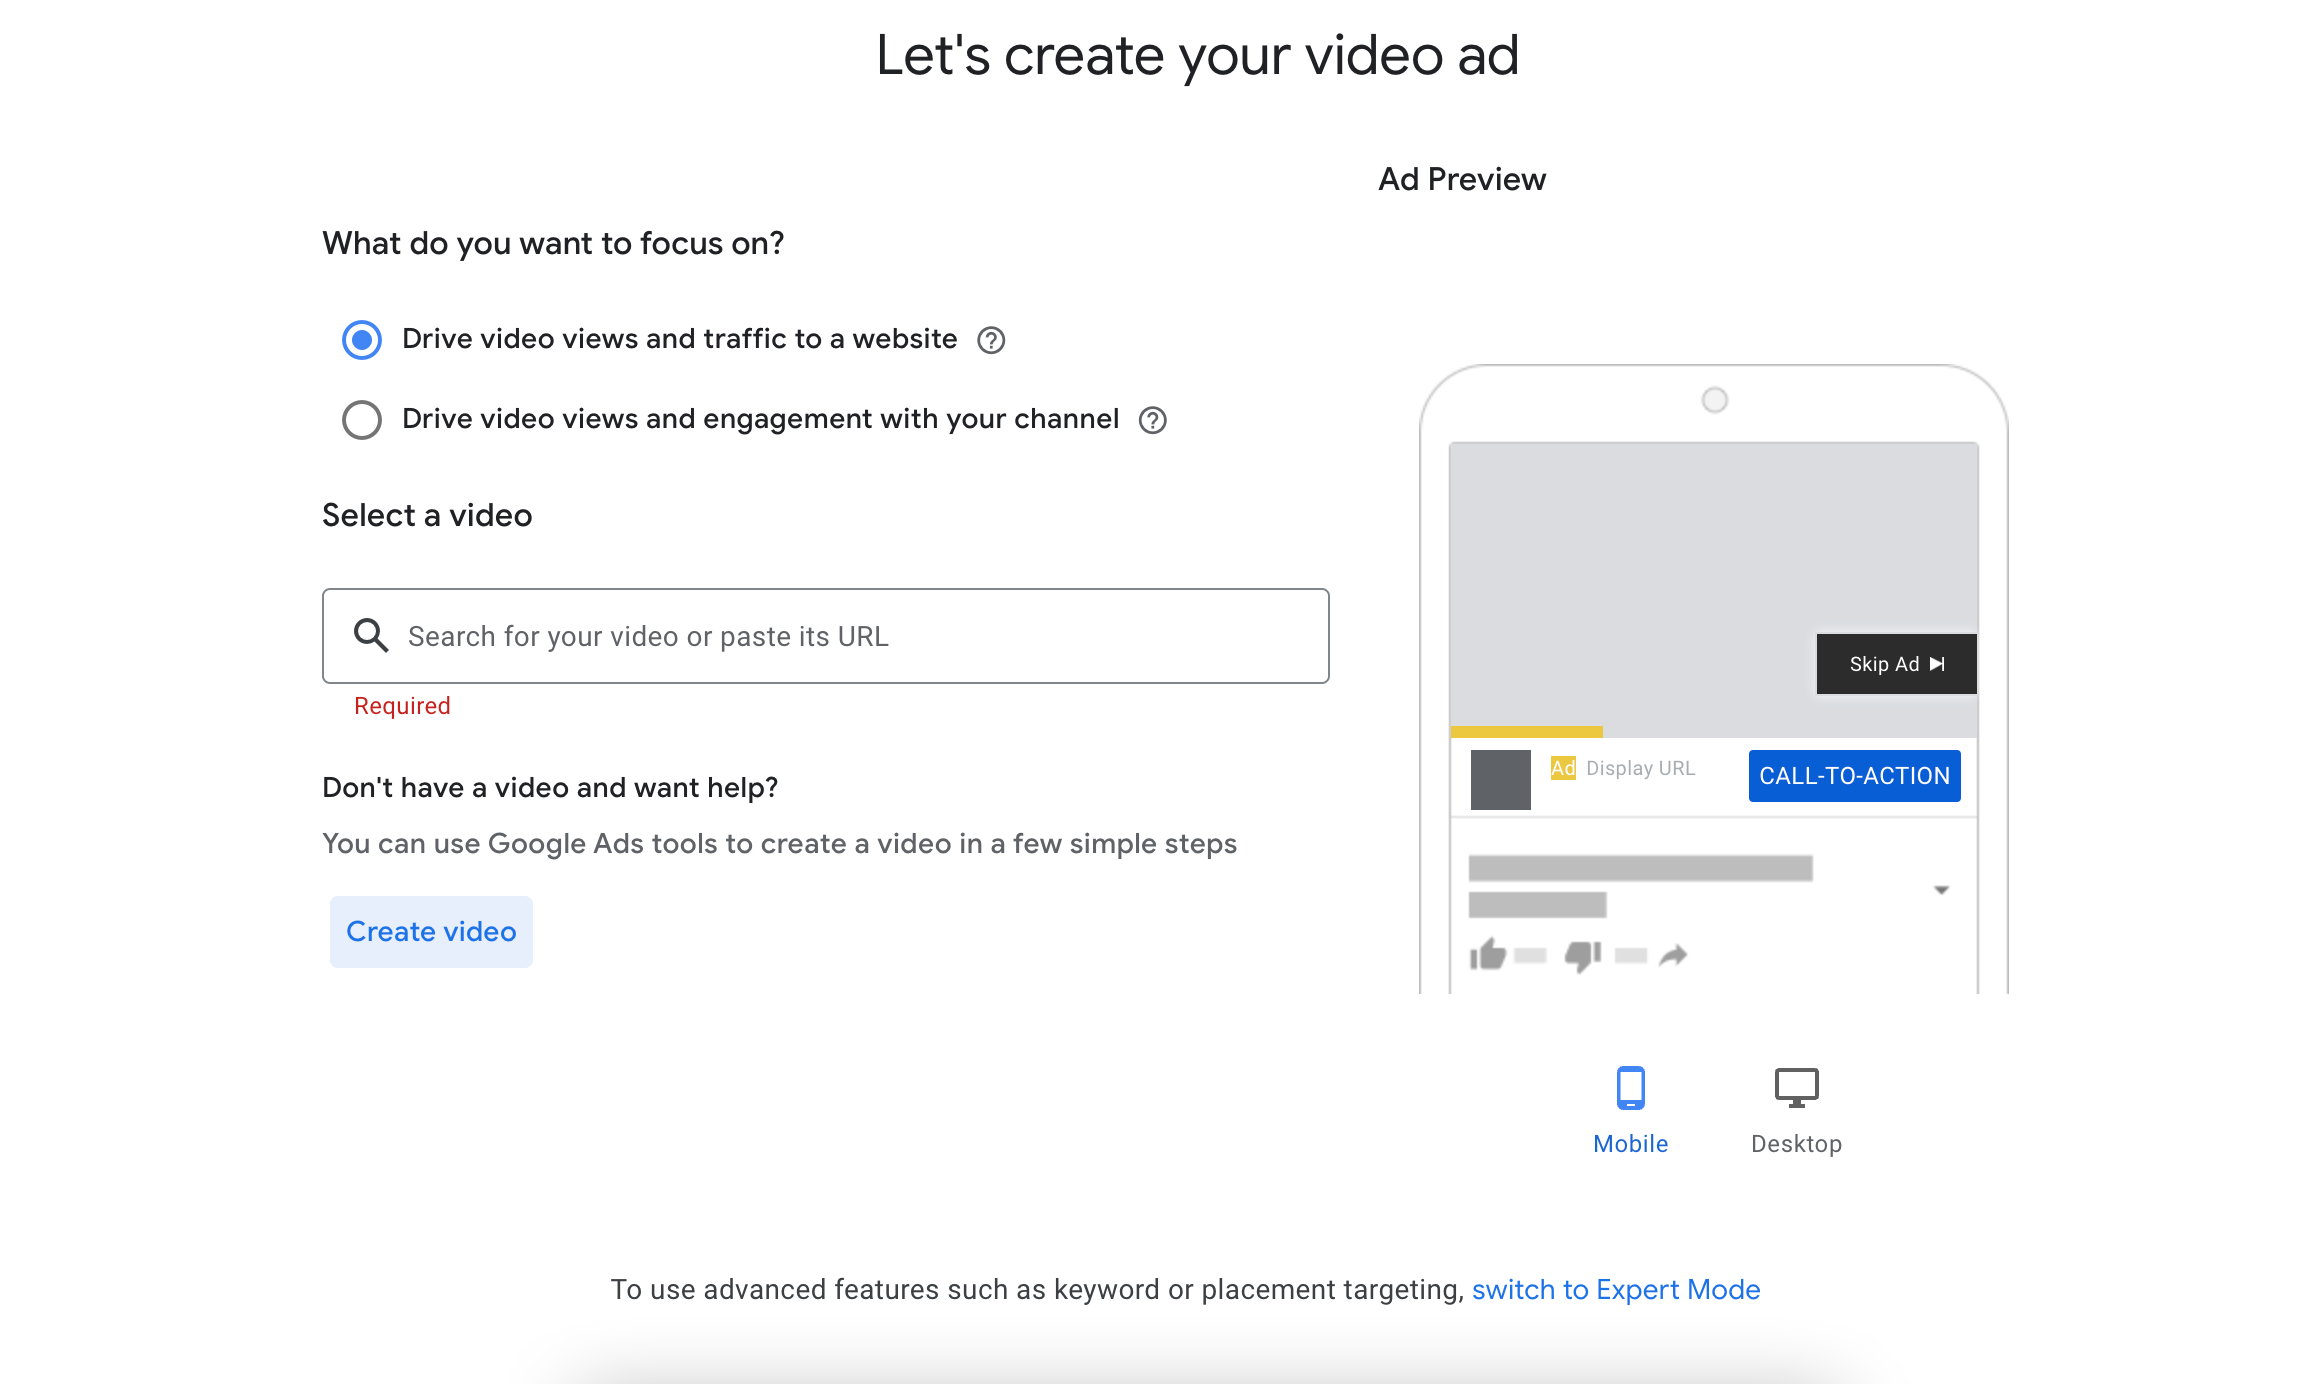 The first step of creating a video ad on YouTube